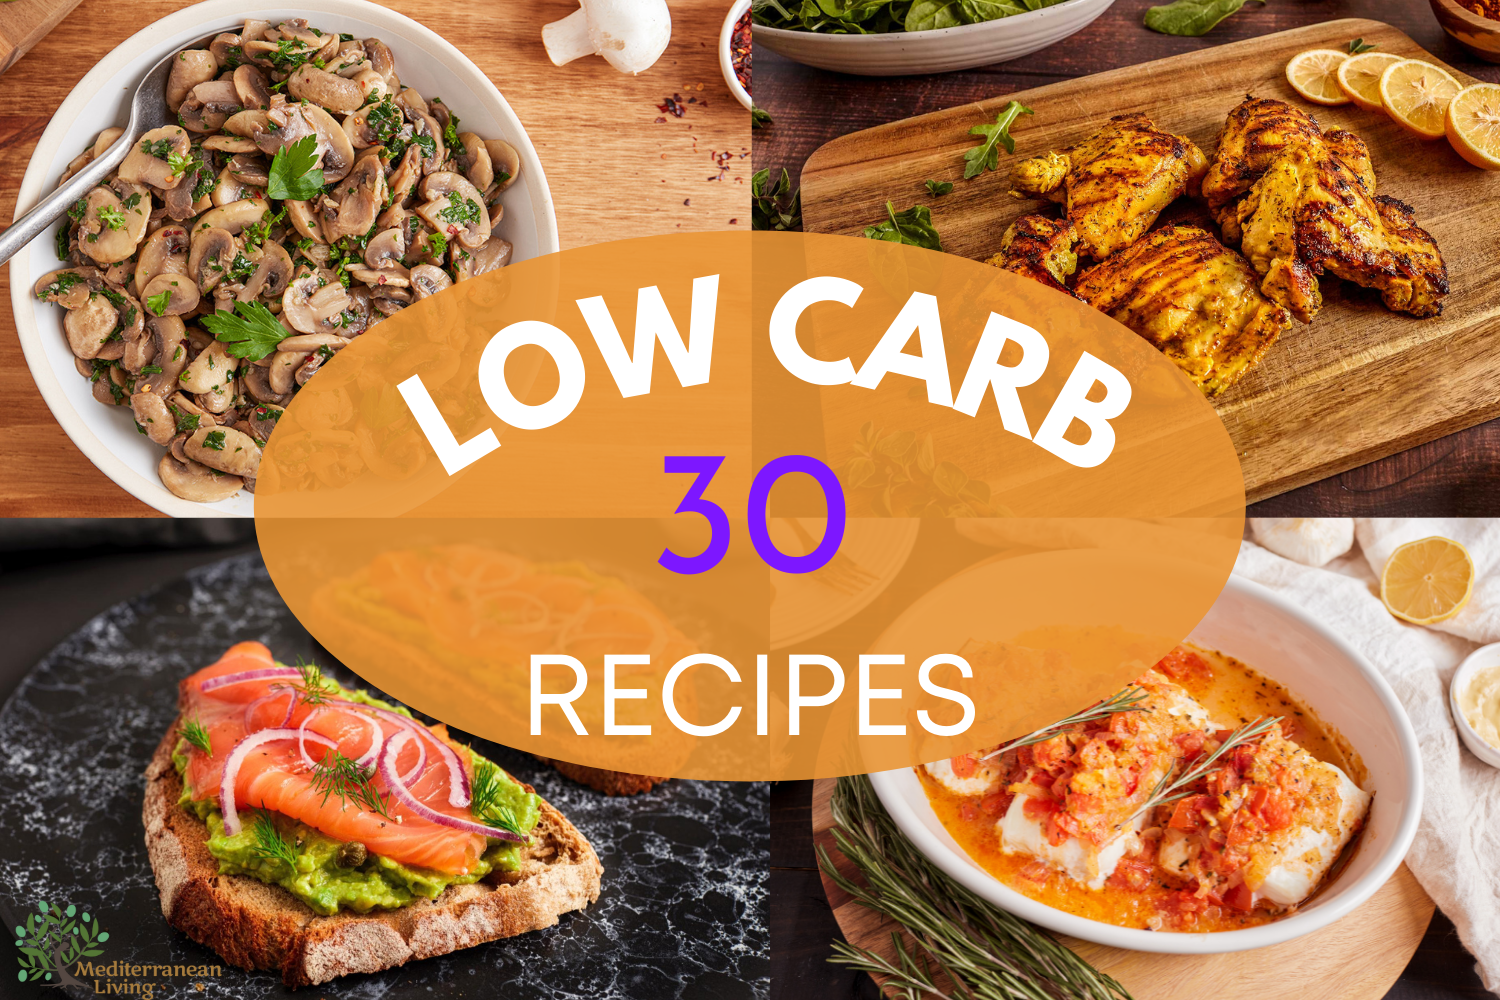 low carbohydrate foods